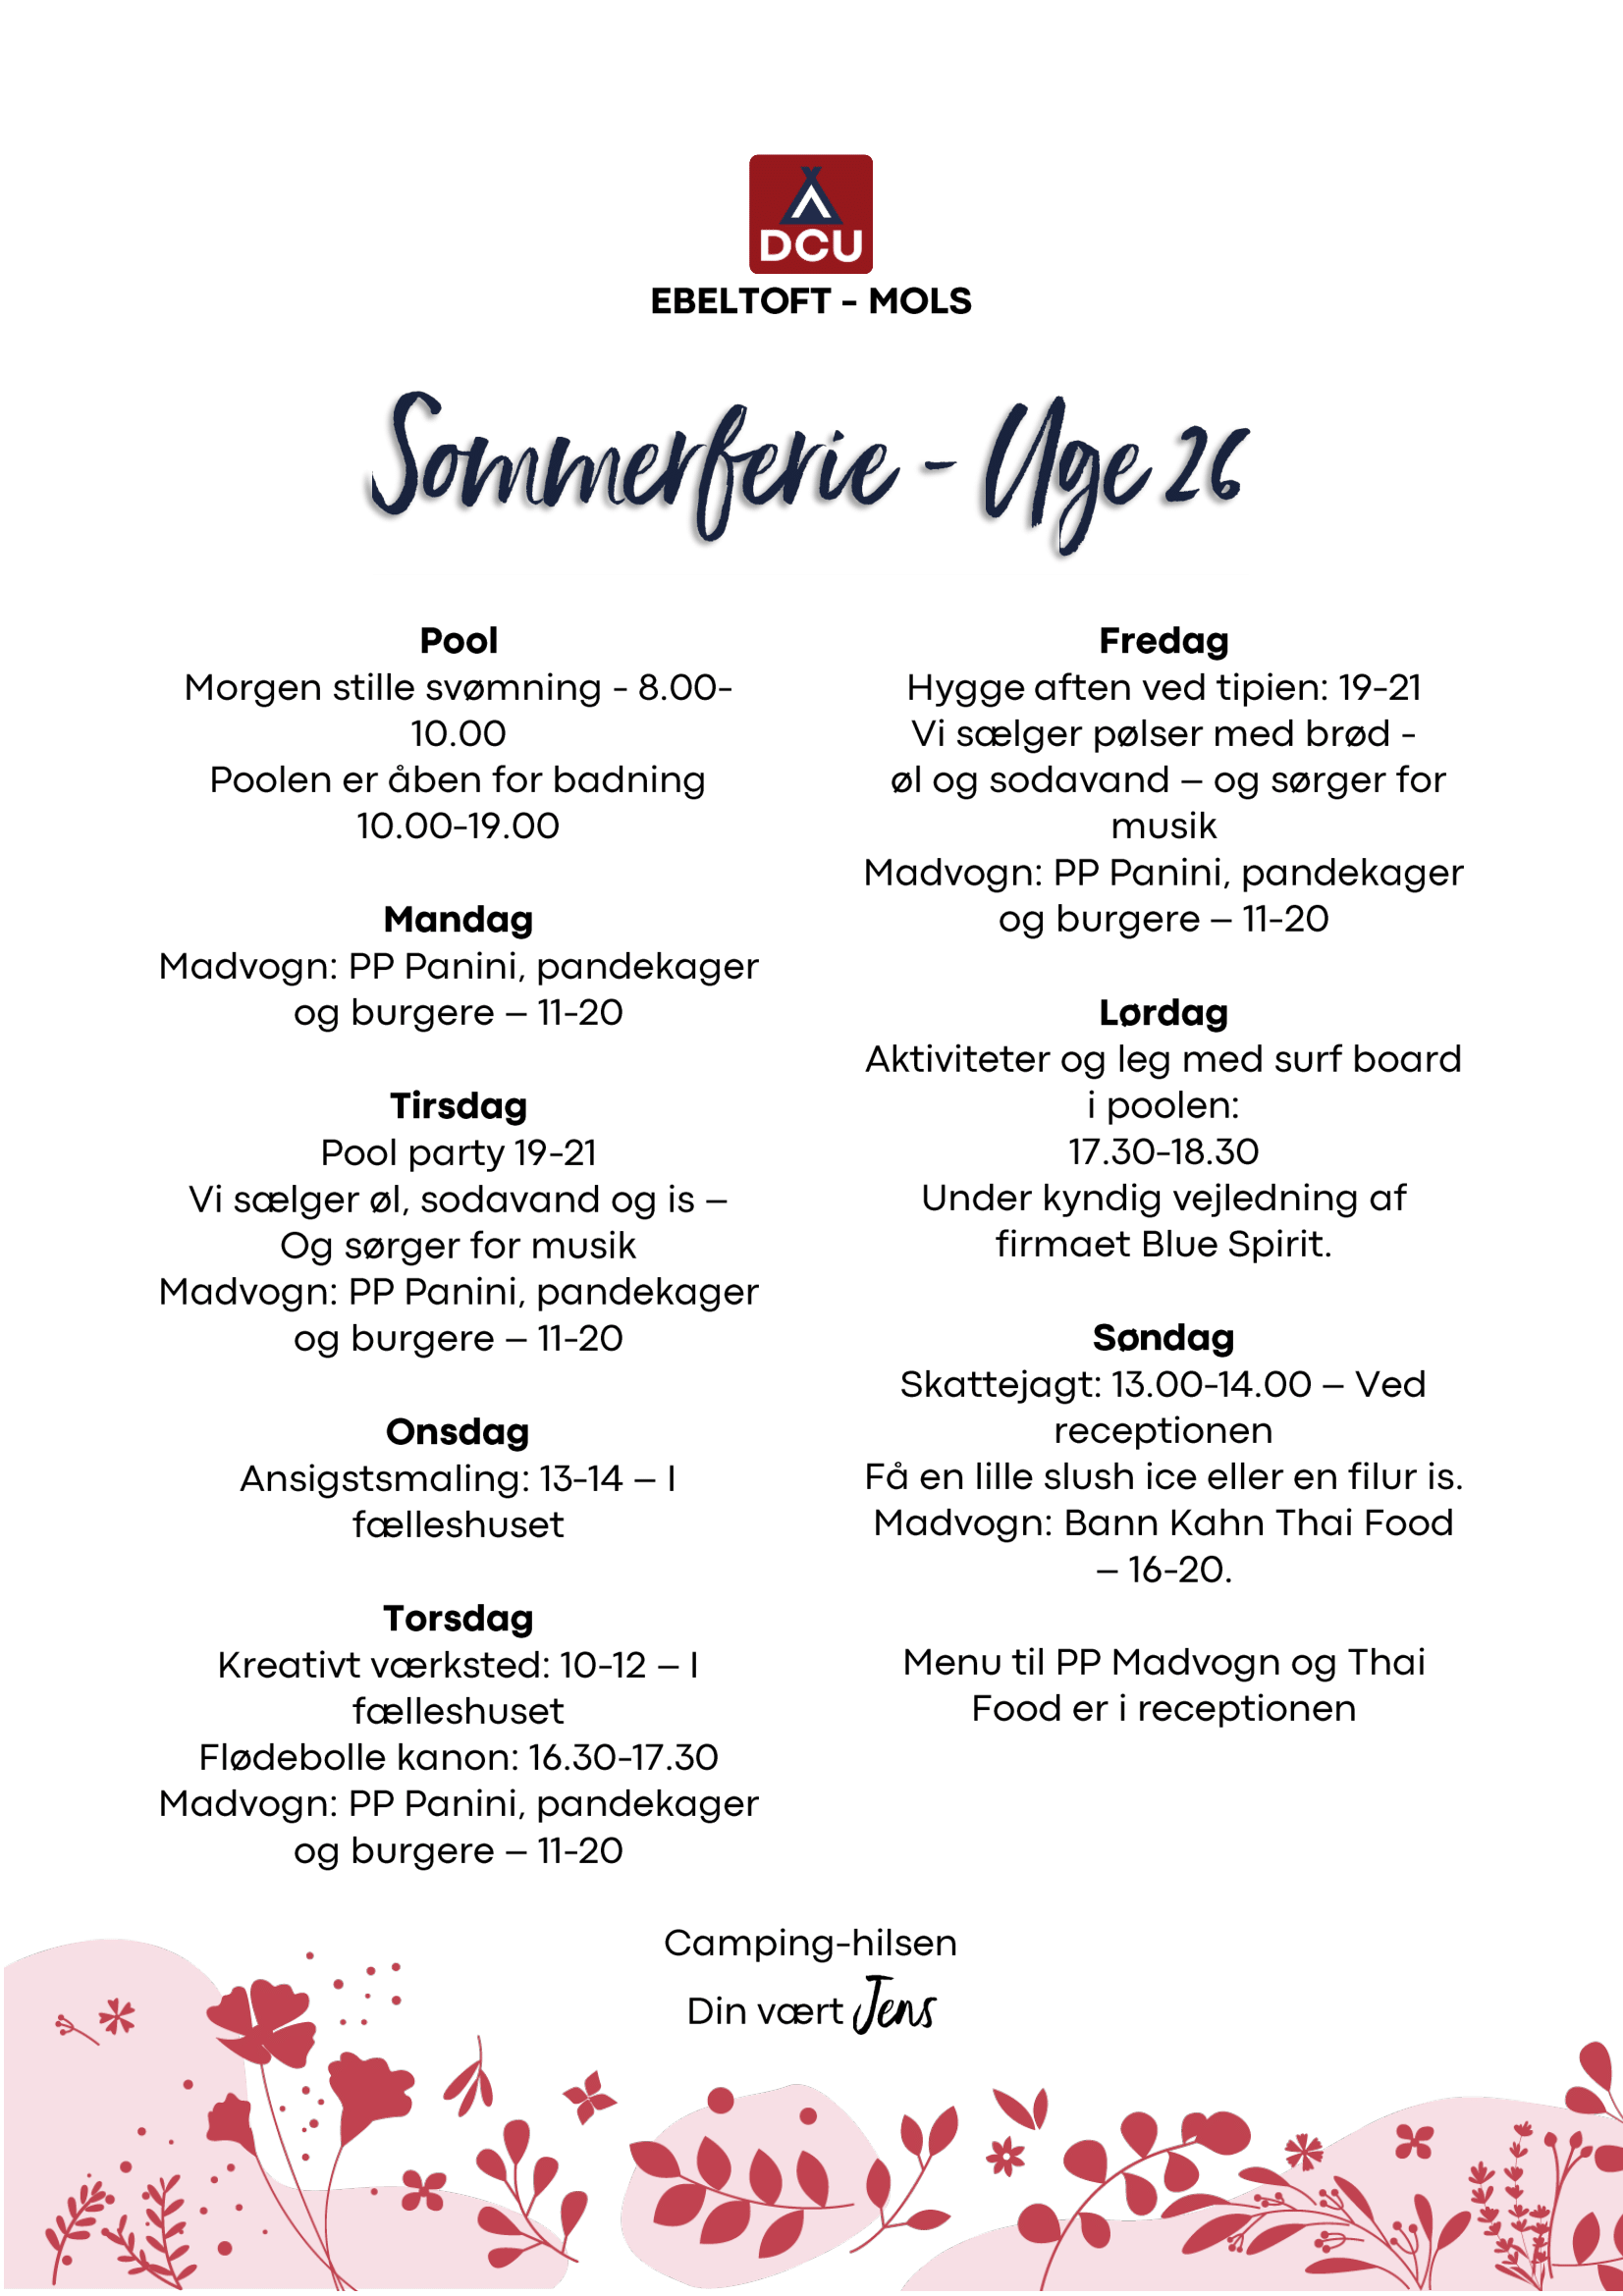 DCU-CAMPING - Sommerferie Uge 26 - MOLS.png 